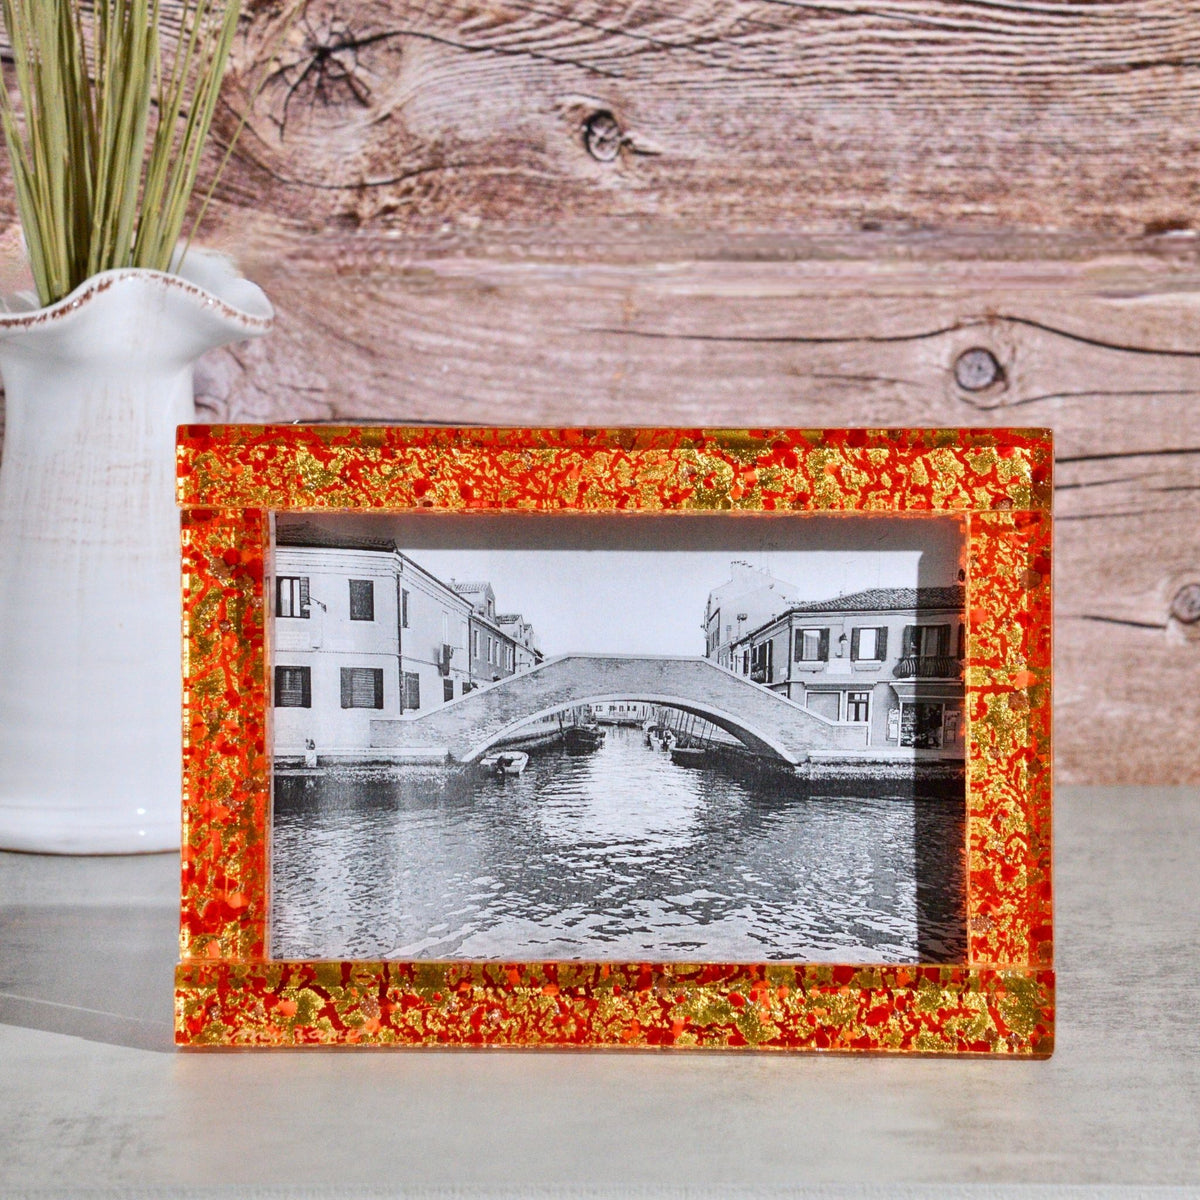 Red &amp; Gold Murano Glass 5&quot; x 7&quot; Photo Frame, Made in Italy - My Italian Decor